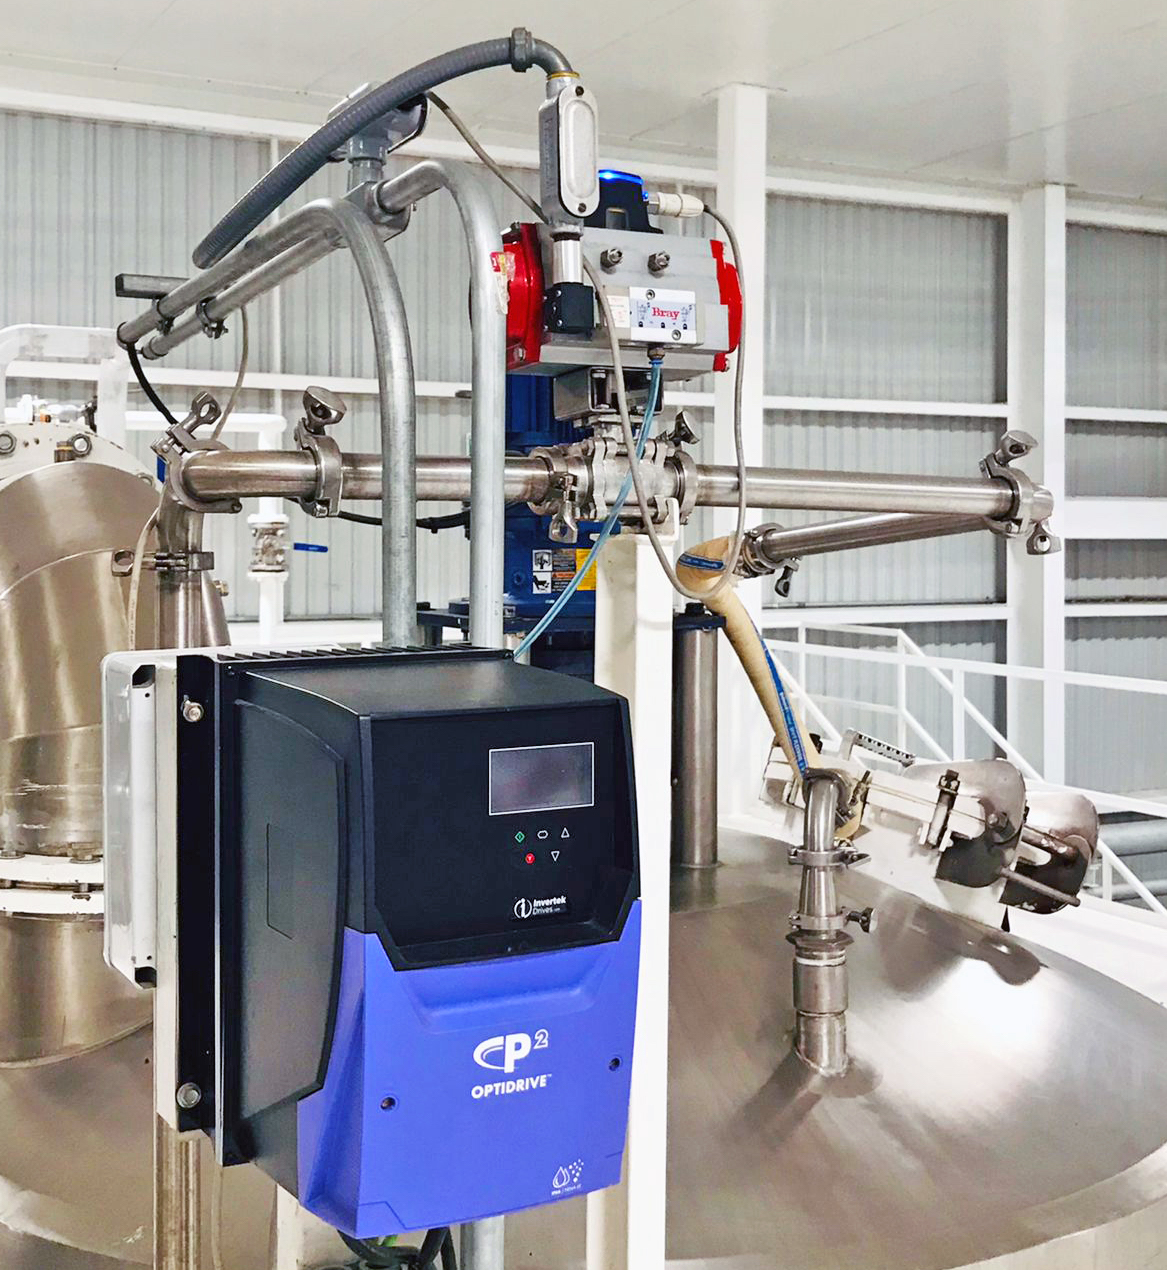 Automotive cleaning chemicals manufacturer turns to Optidrive P2 for mixer application 